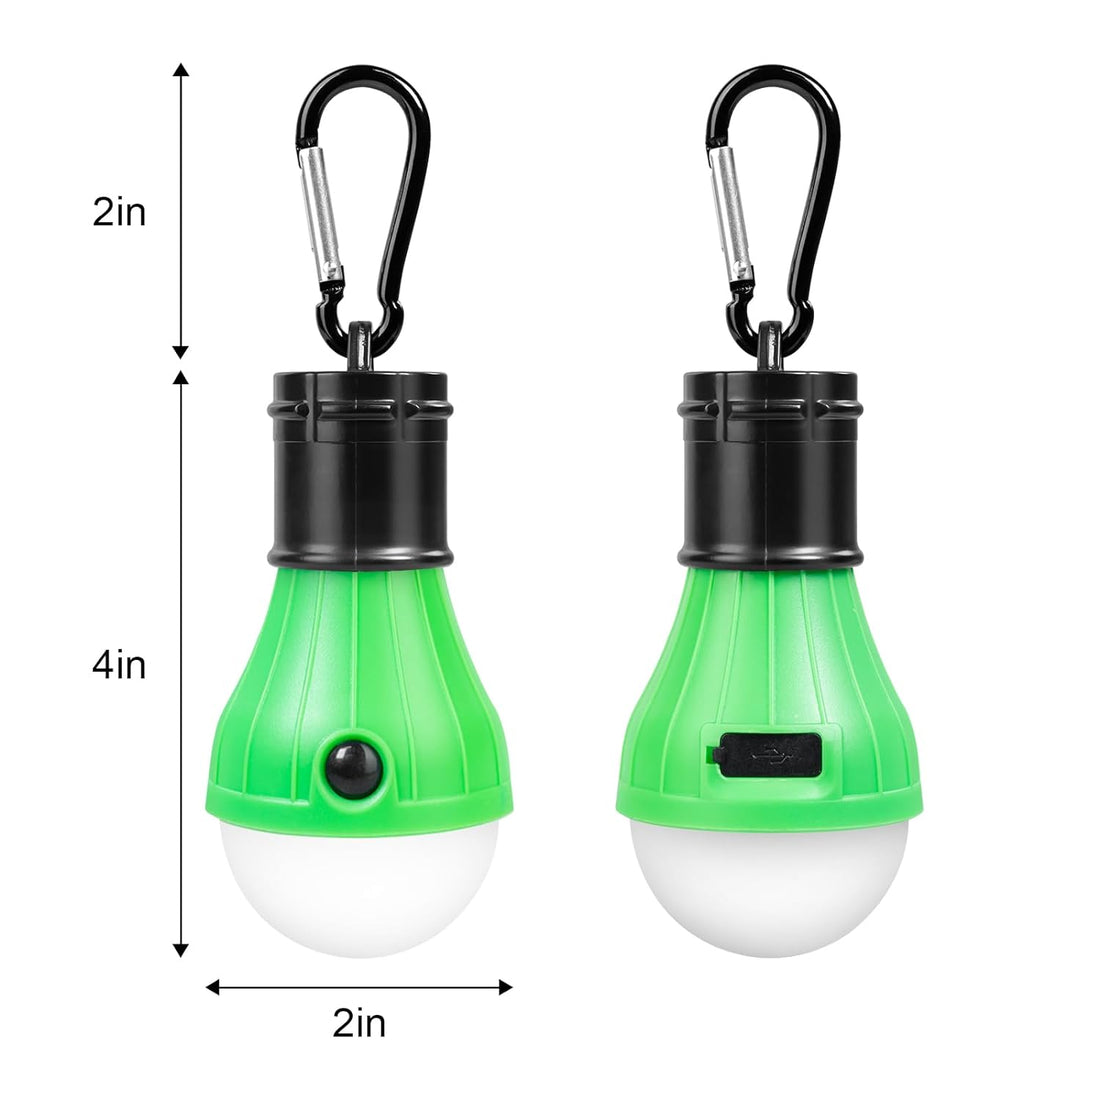 Jarxin Led Camping Lantern USB Rechargeable,Outdoor Tent Lights for Camping Hanging,Kids with Clip Hook Camping Flashlight (2 Packs Black)